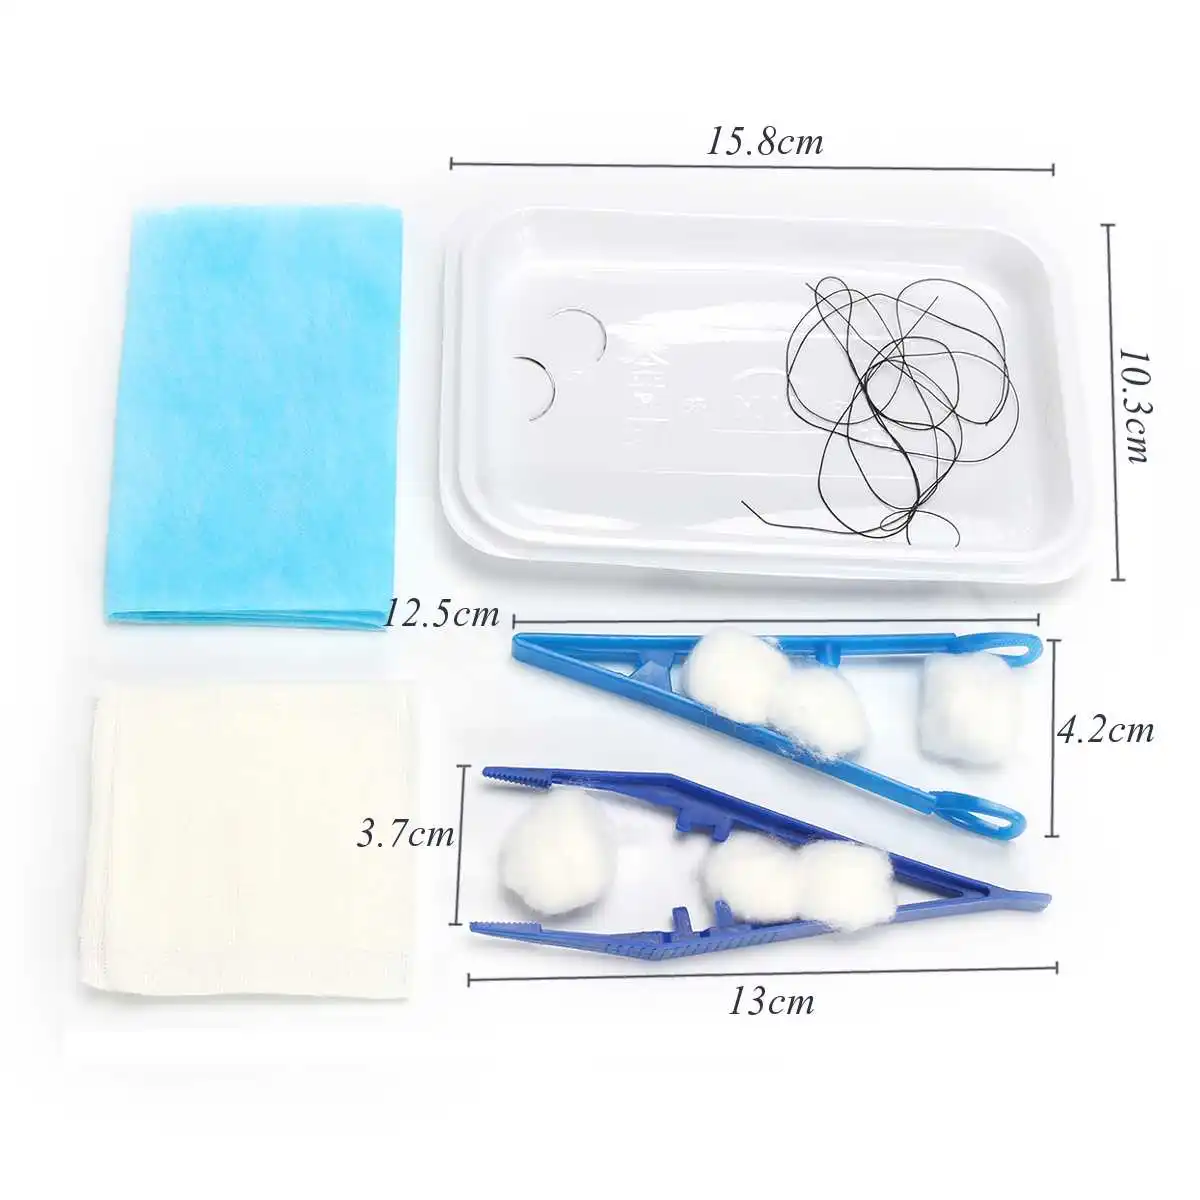 13 in 1 Medical Suture Practice Kit Reusable Medical Student 3 Layer Suture Pad Human Skin Suture Training Model 17x10.2x1.3cm